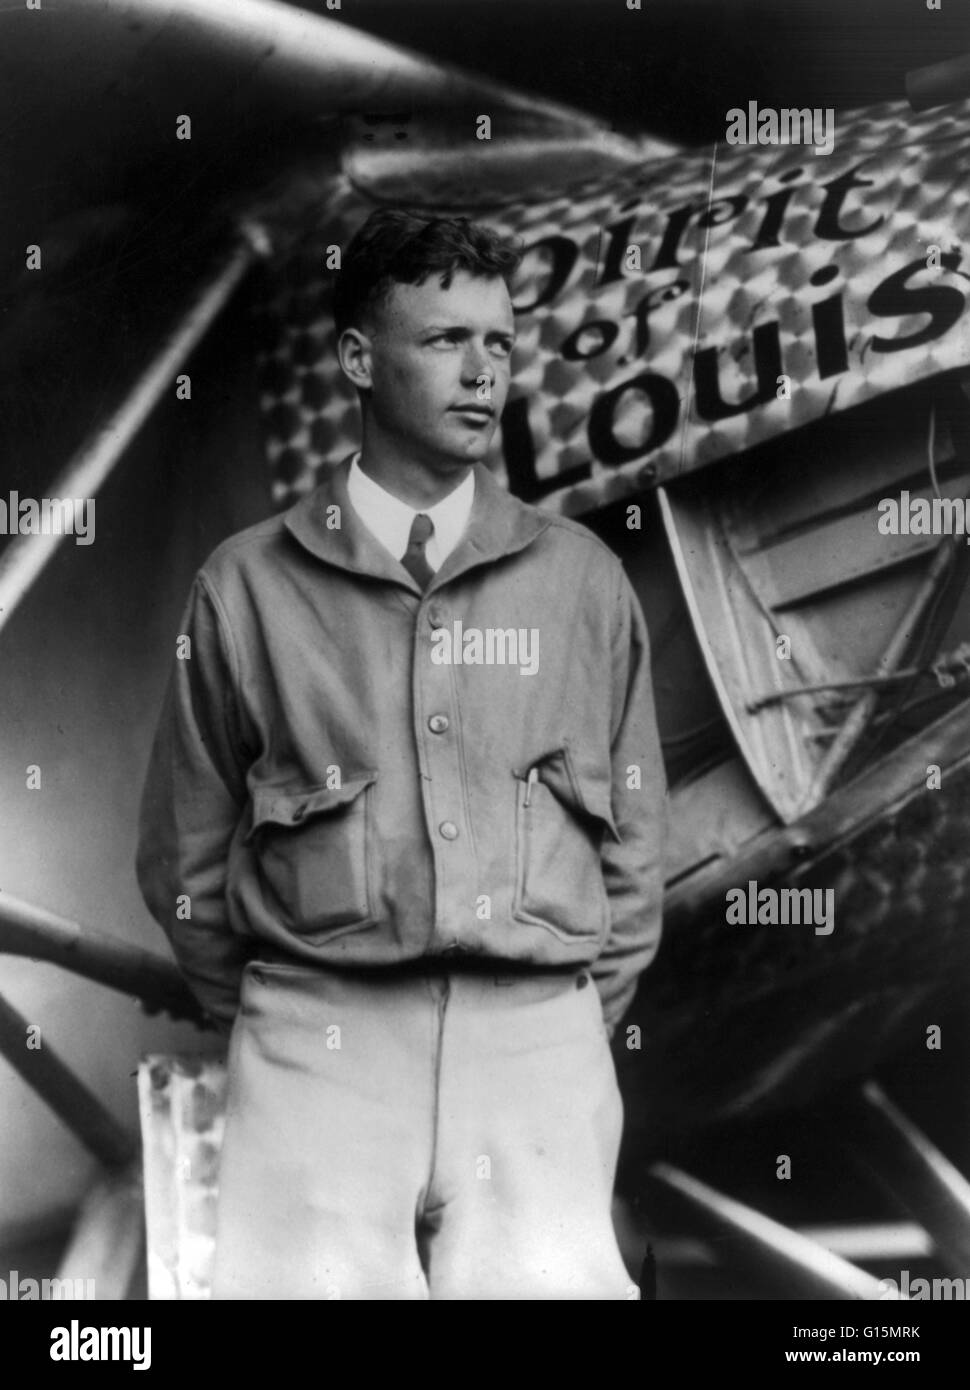 Lindbergh, with Spirit of St. Louis in background, May 31, 1927. Charles Augustus Lindbergh (February 4, 1902 - August 26, 1974) was an American aviator. Lindbergh gained world fame as the result of his solo non-stop flight on May 20-21, 1927, made from R Stock Photo